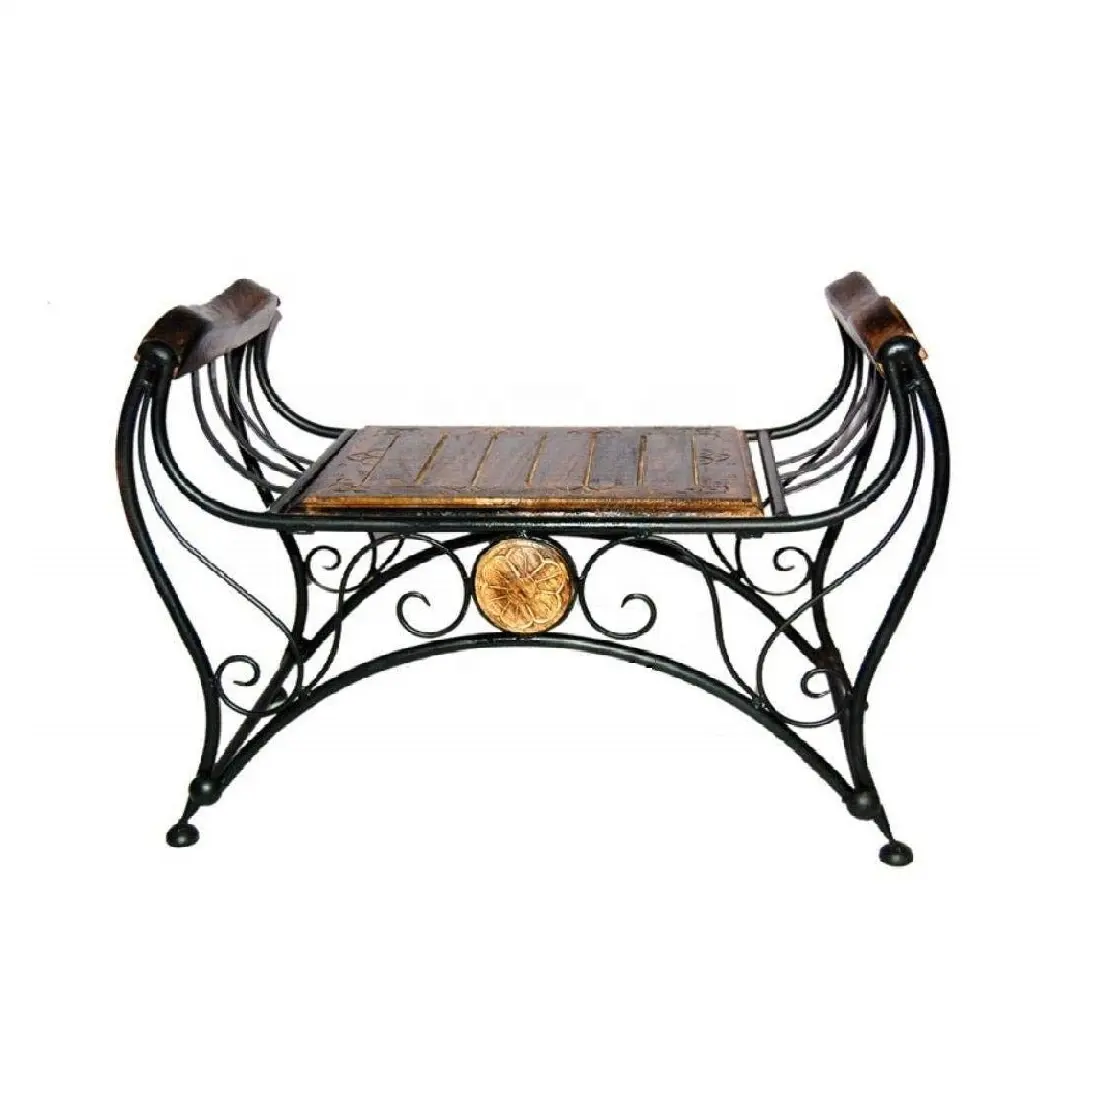 Wooden & Wrought Iron Patio Bench for Living Room Lounge Furniture Garden